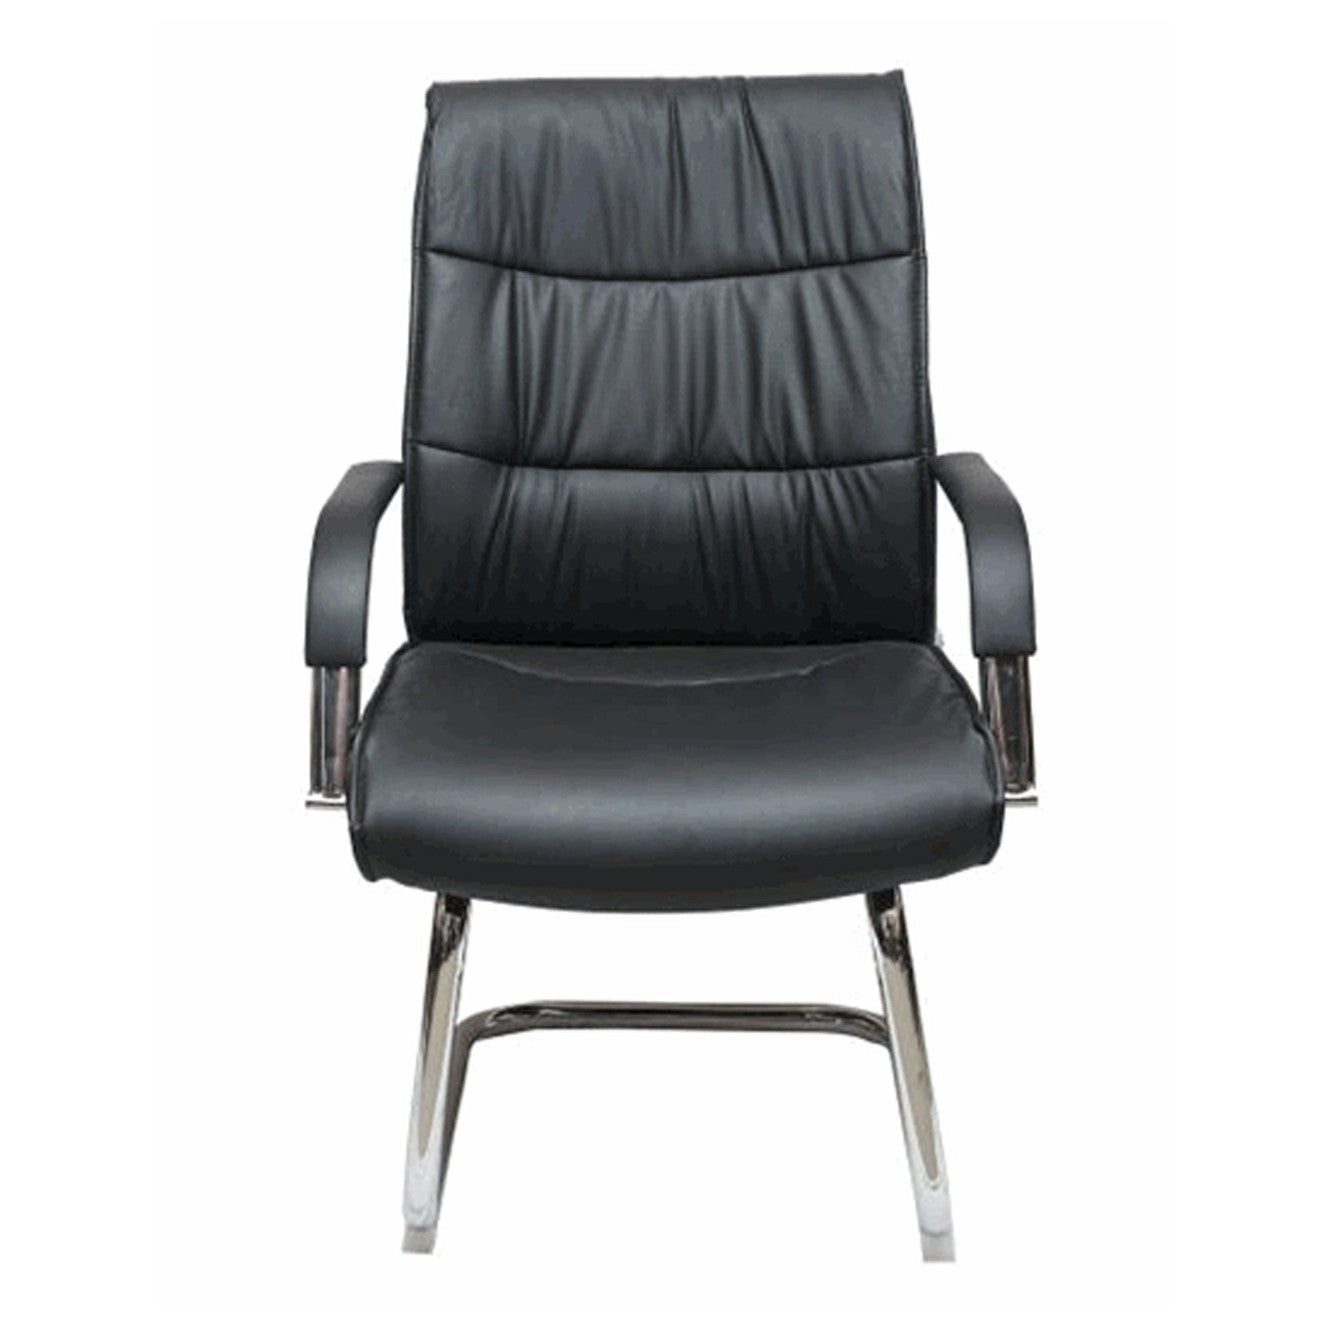 SR/SA-2010C EQUITY FIXED OFFICE CHAIR Mobel Furniture